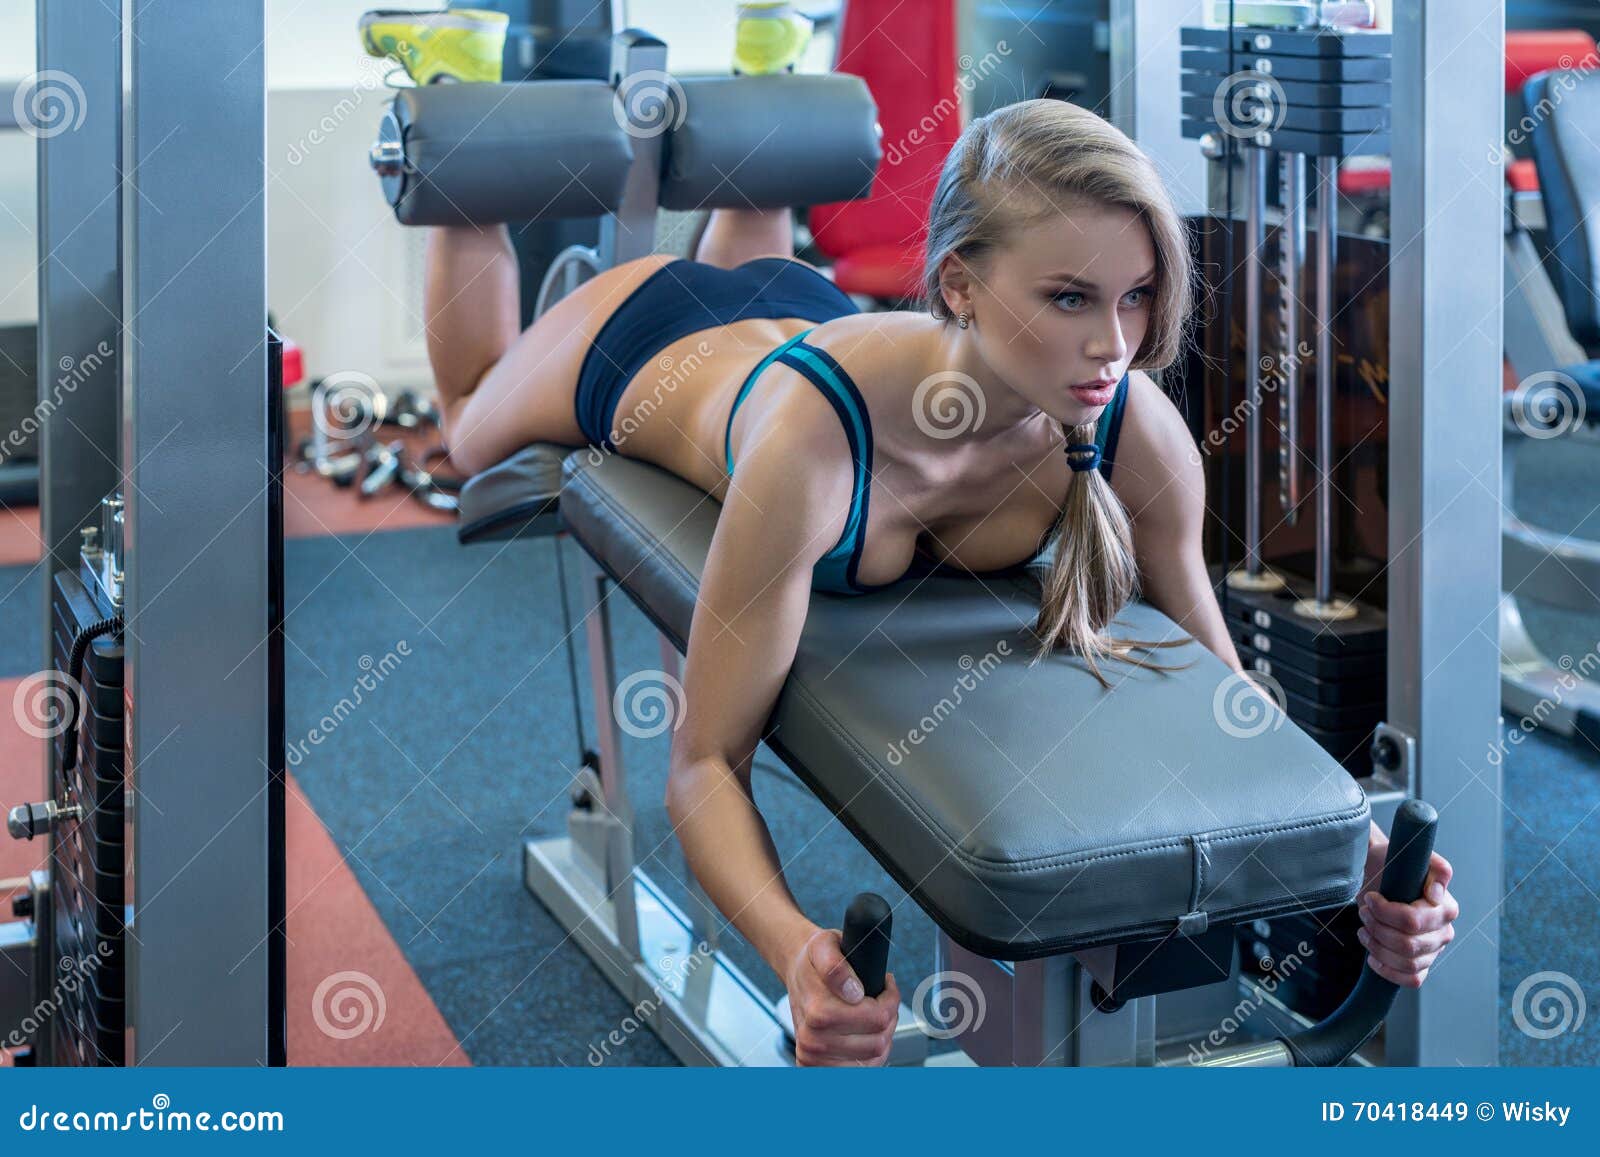 the gym dating simulators for girls rooms